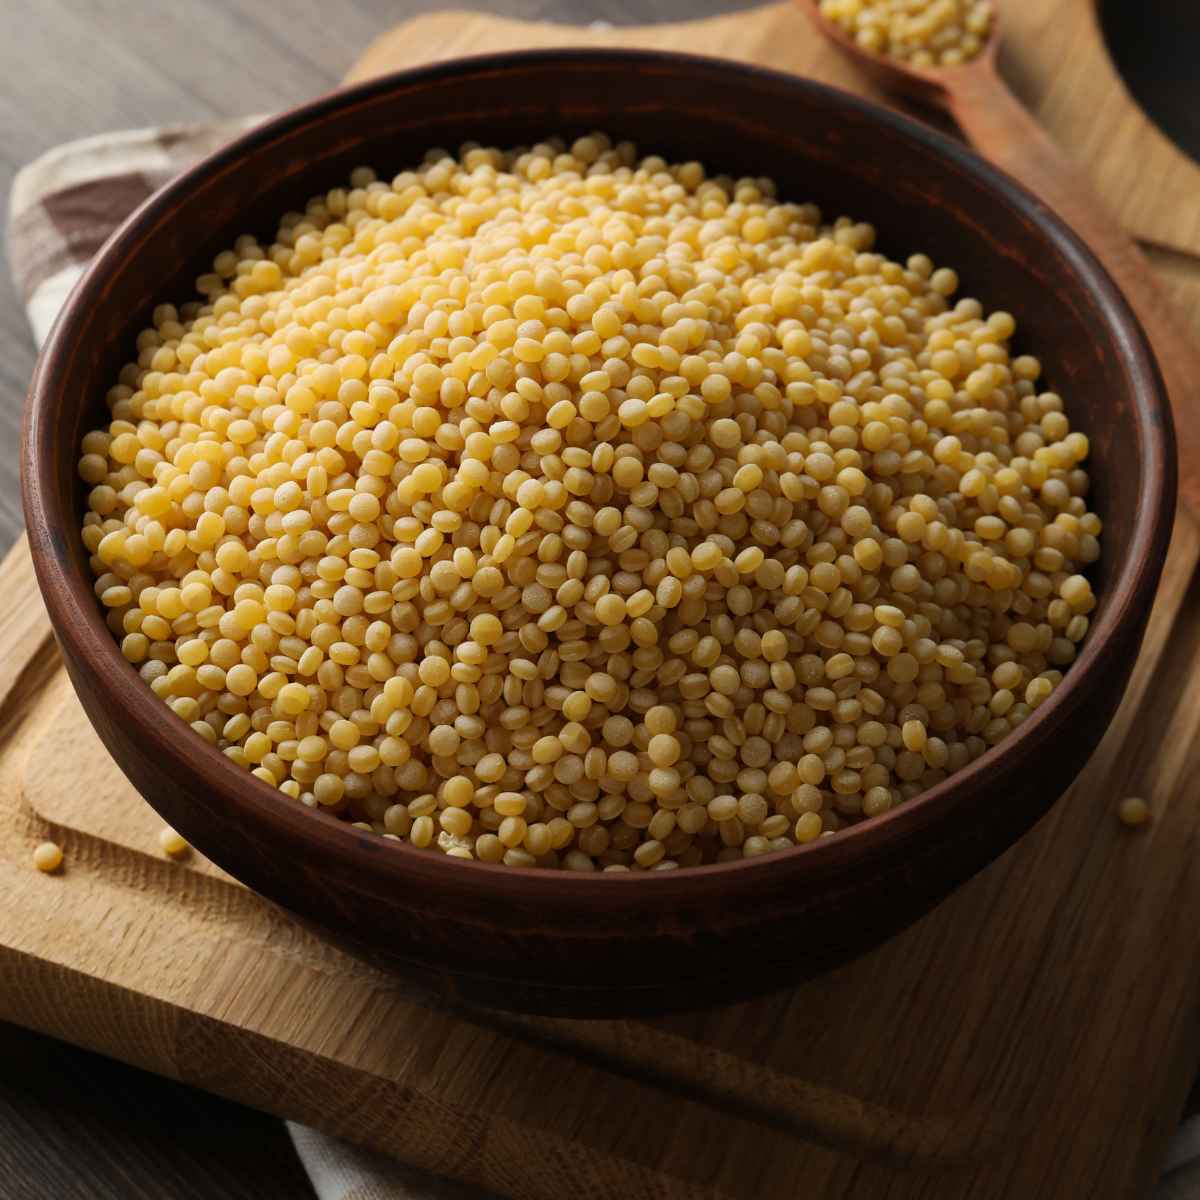 Dry couscous beads in a wooden bowl.